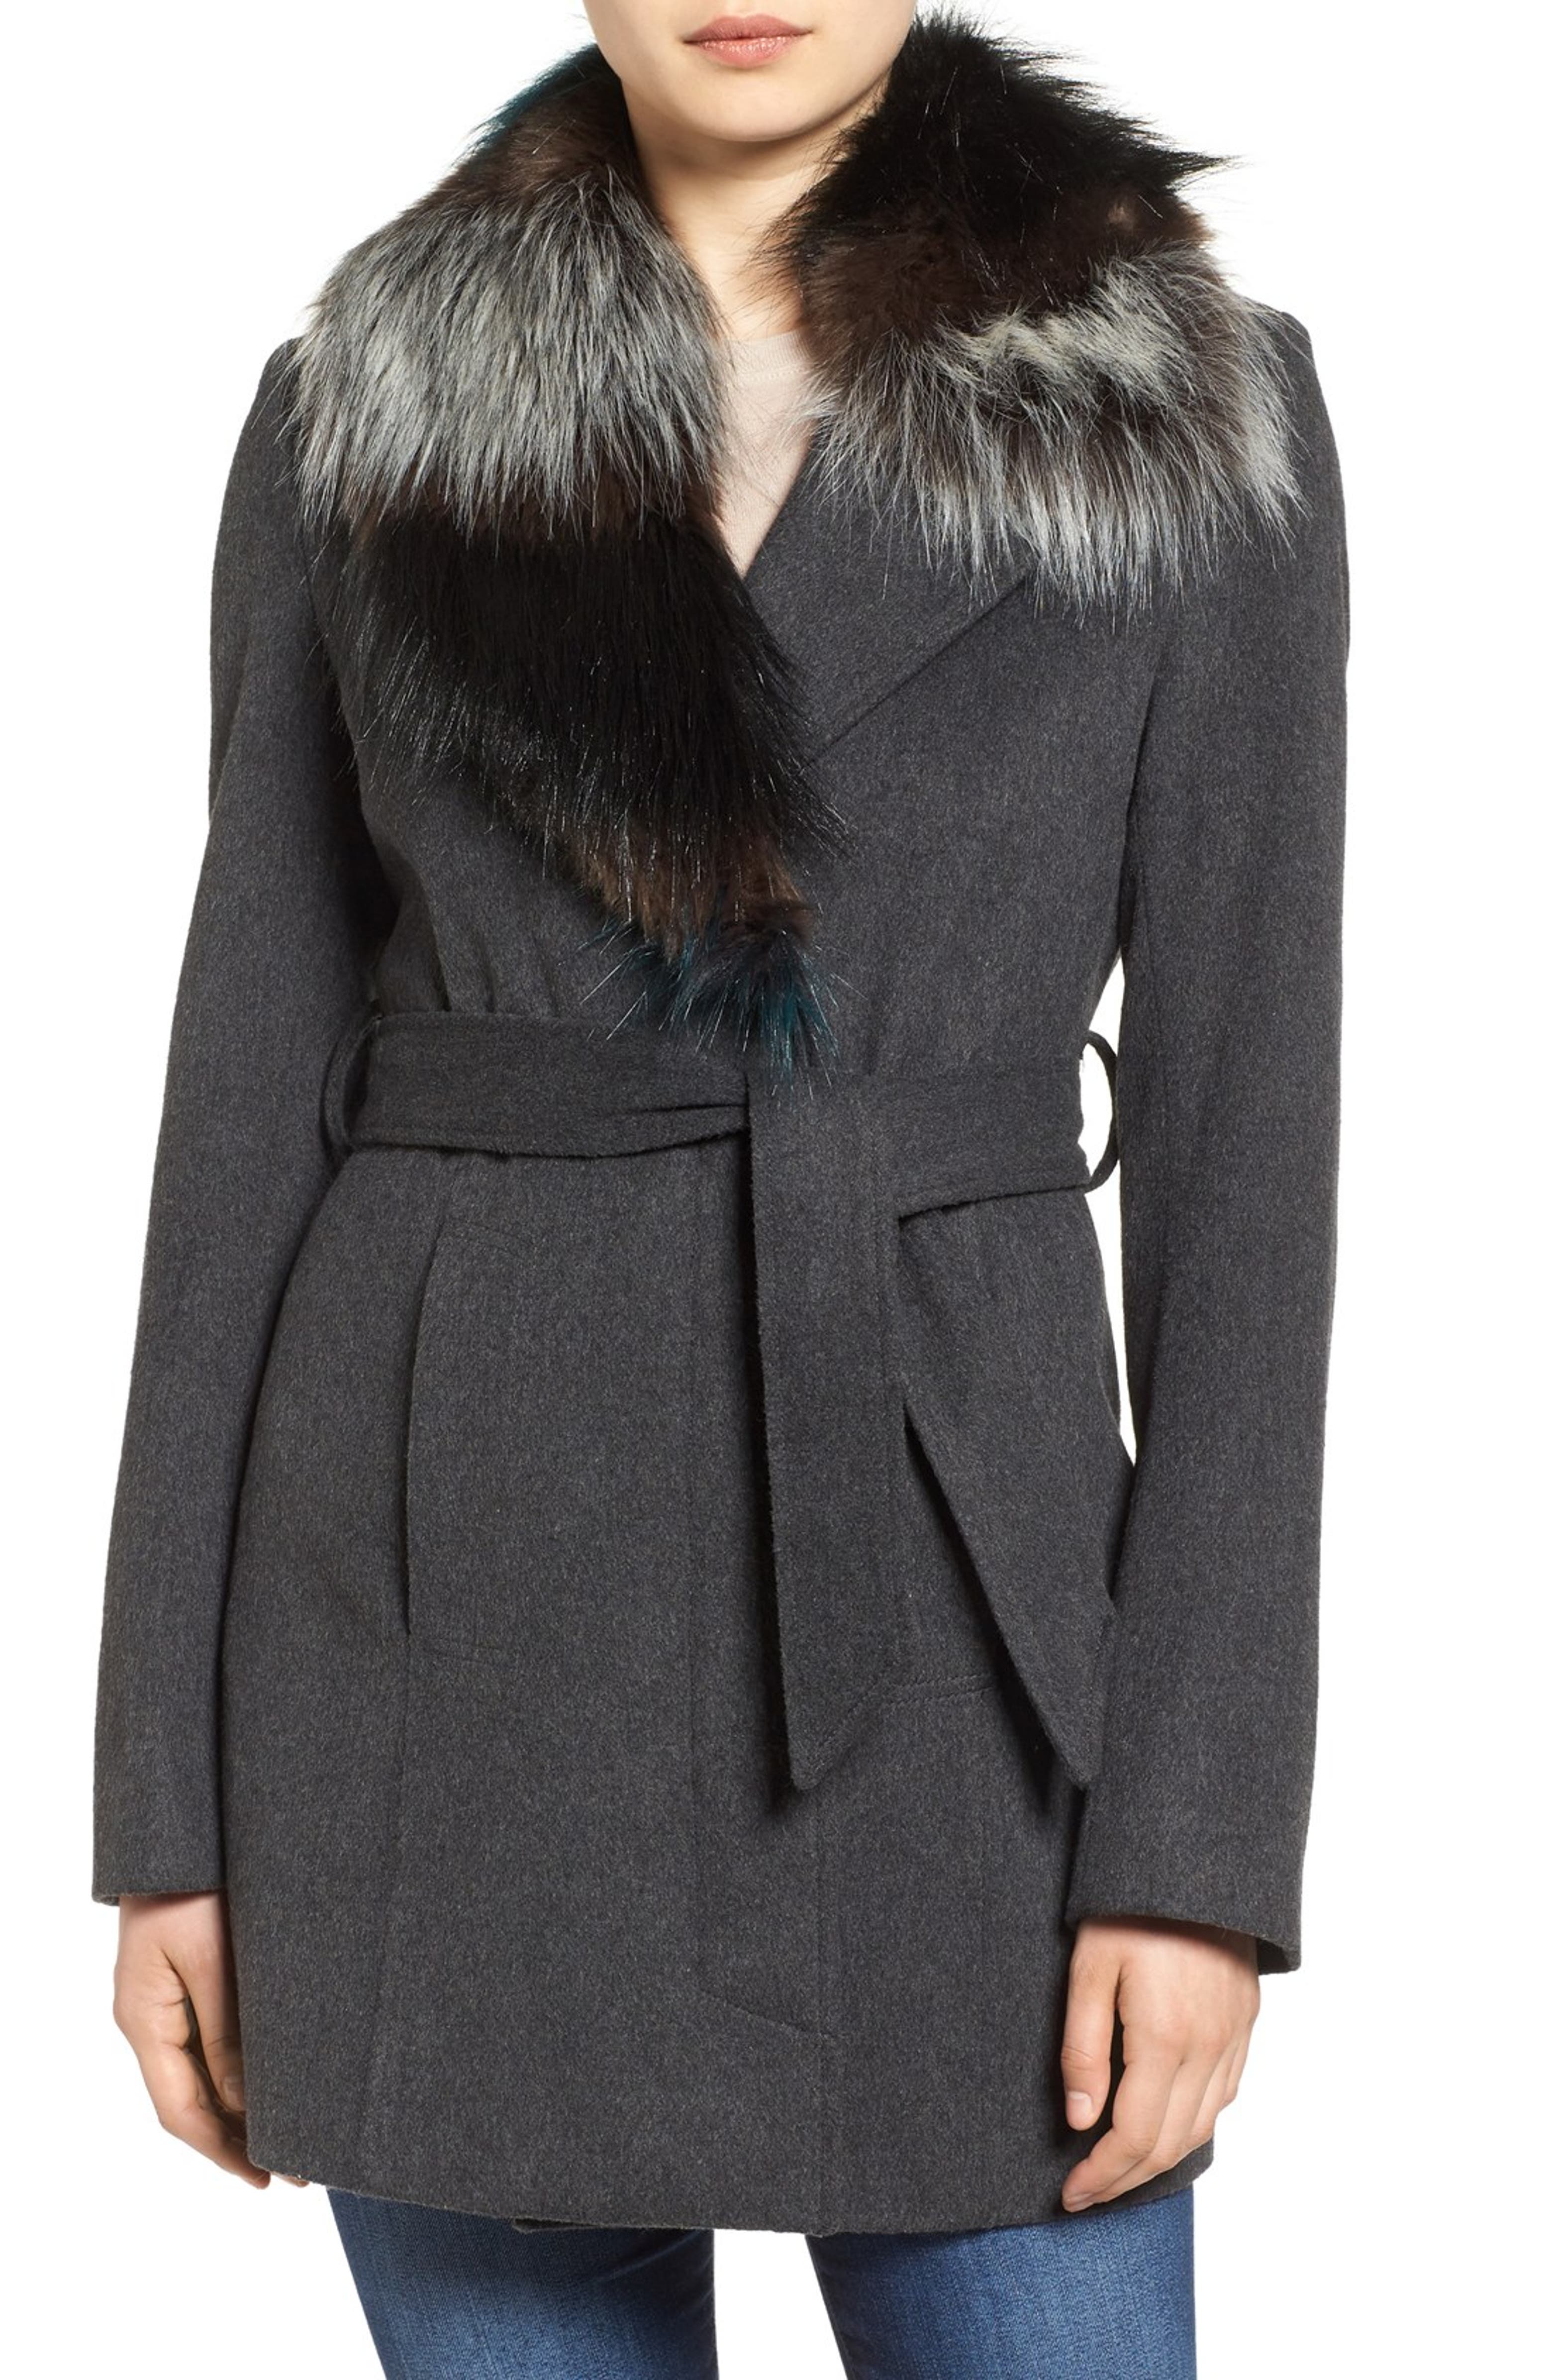 Sam Edelman Wool Coat with Removable Faux Fur Collar | Nordstrom